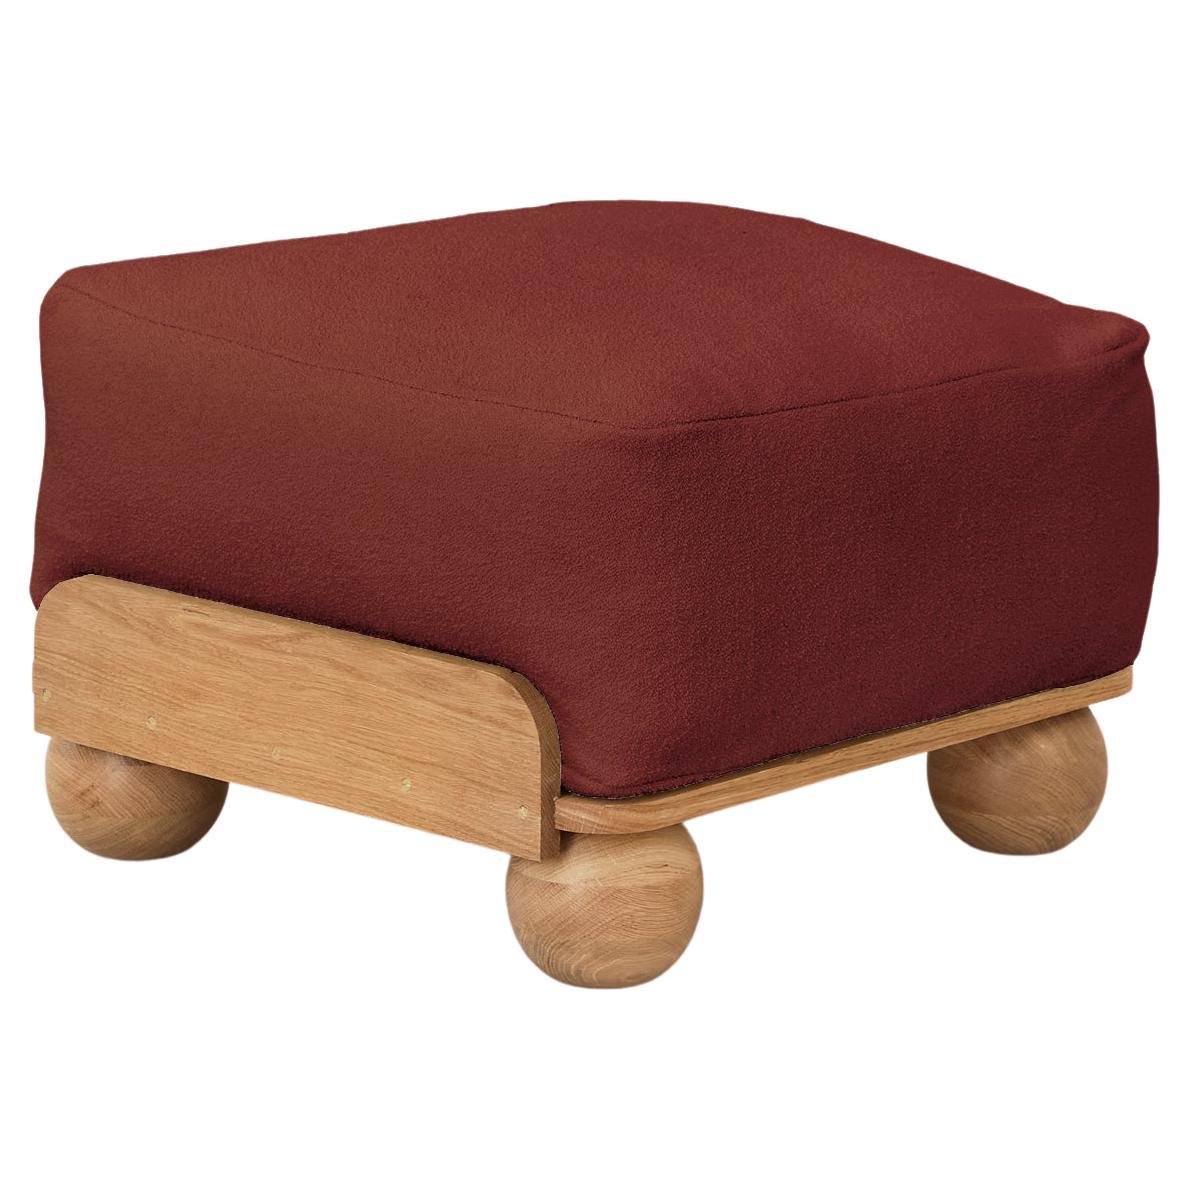 Cove Footstool in Terracotta Red For Sale